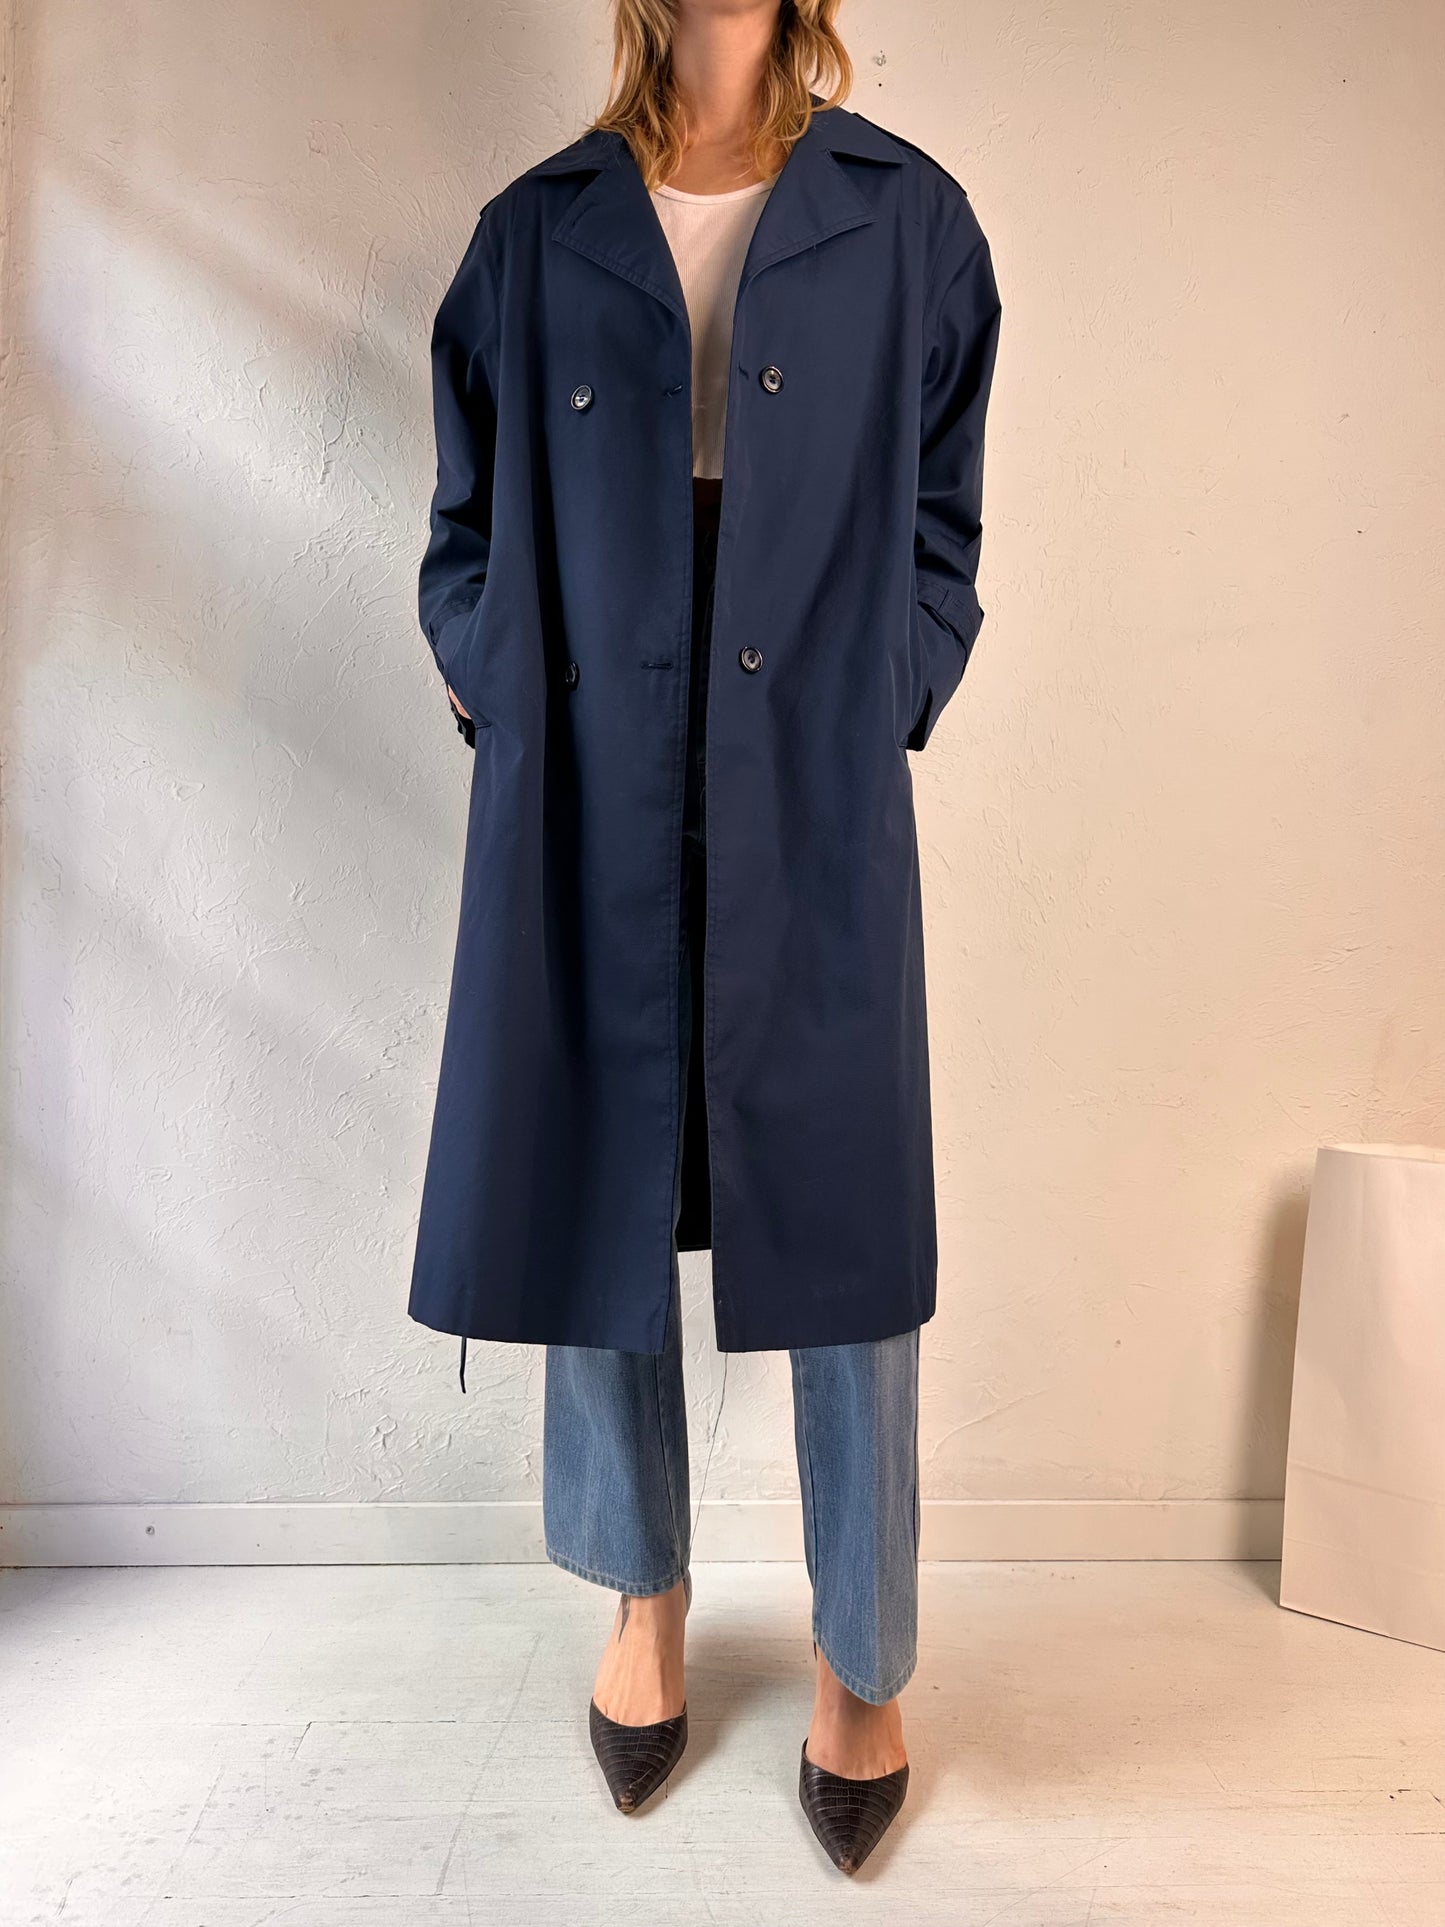 Vintage 'Career Chic' Navy Blue Lightweight Trench Coat / Large